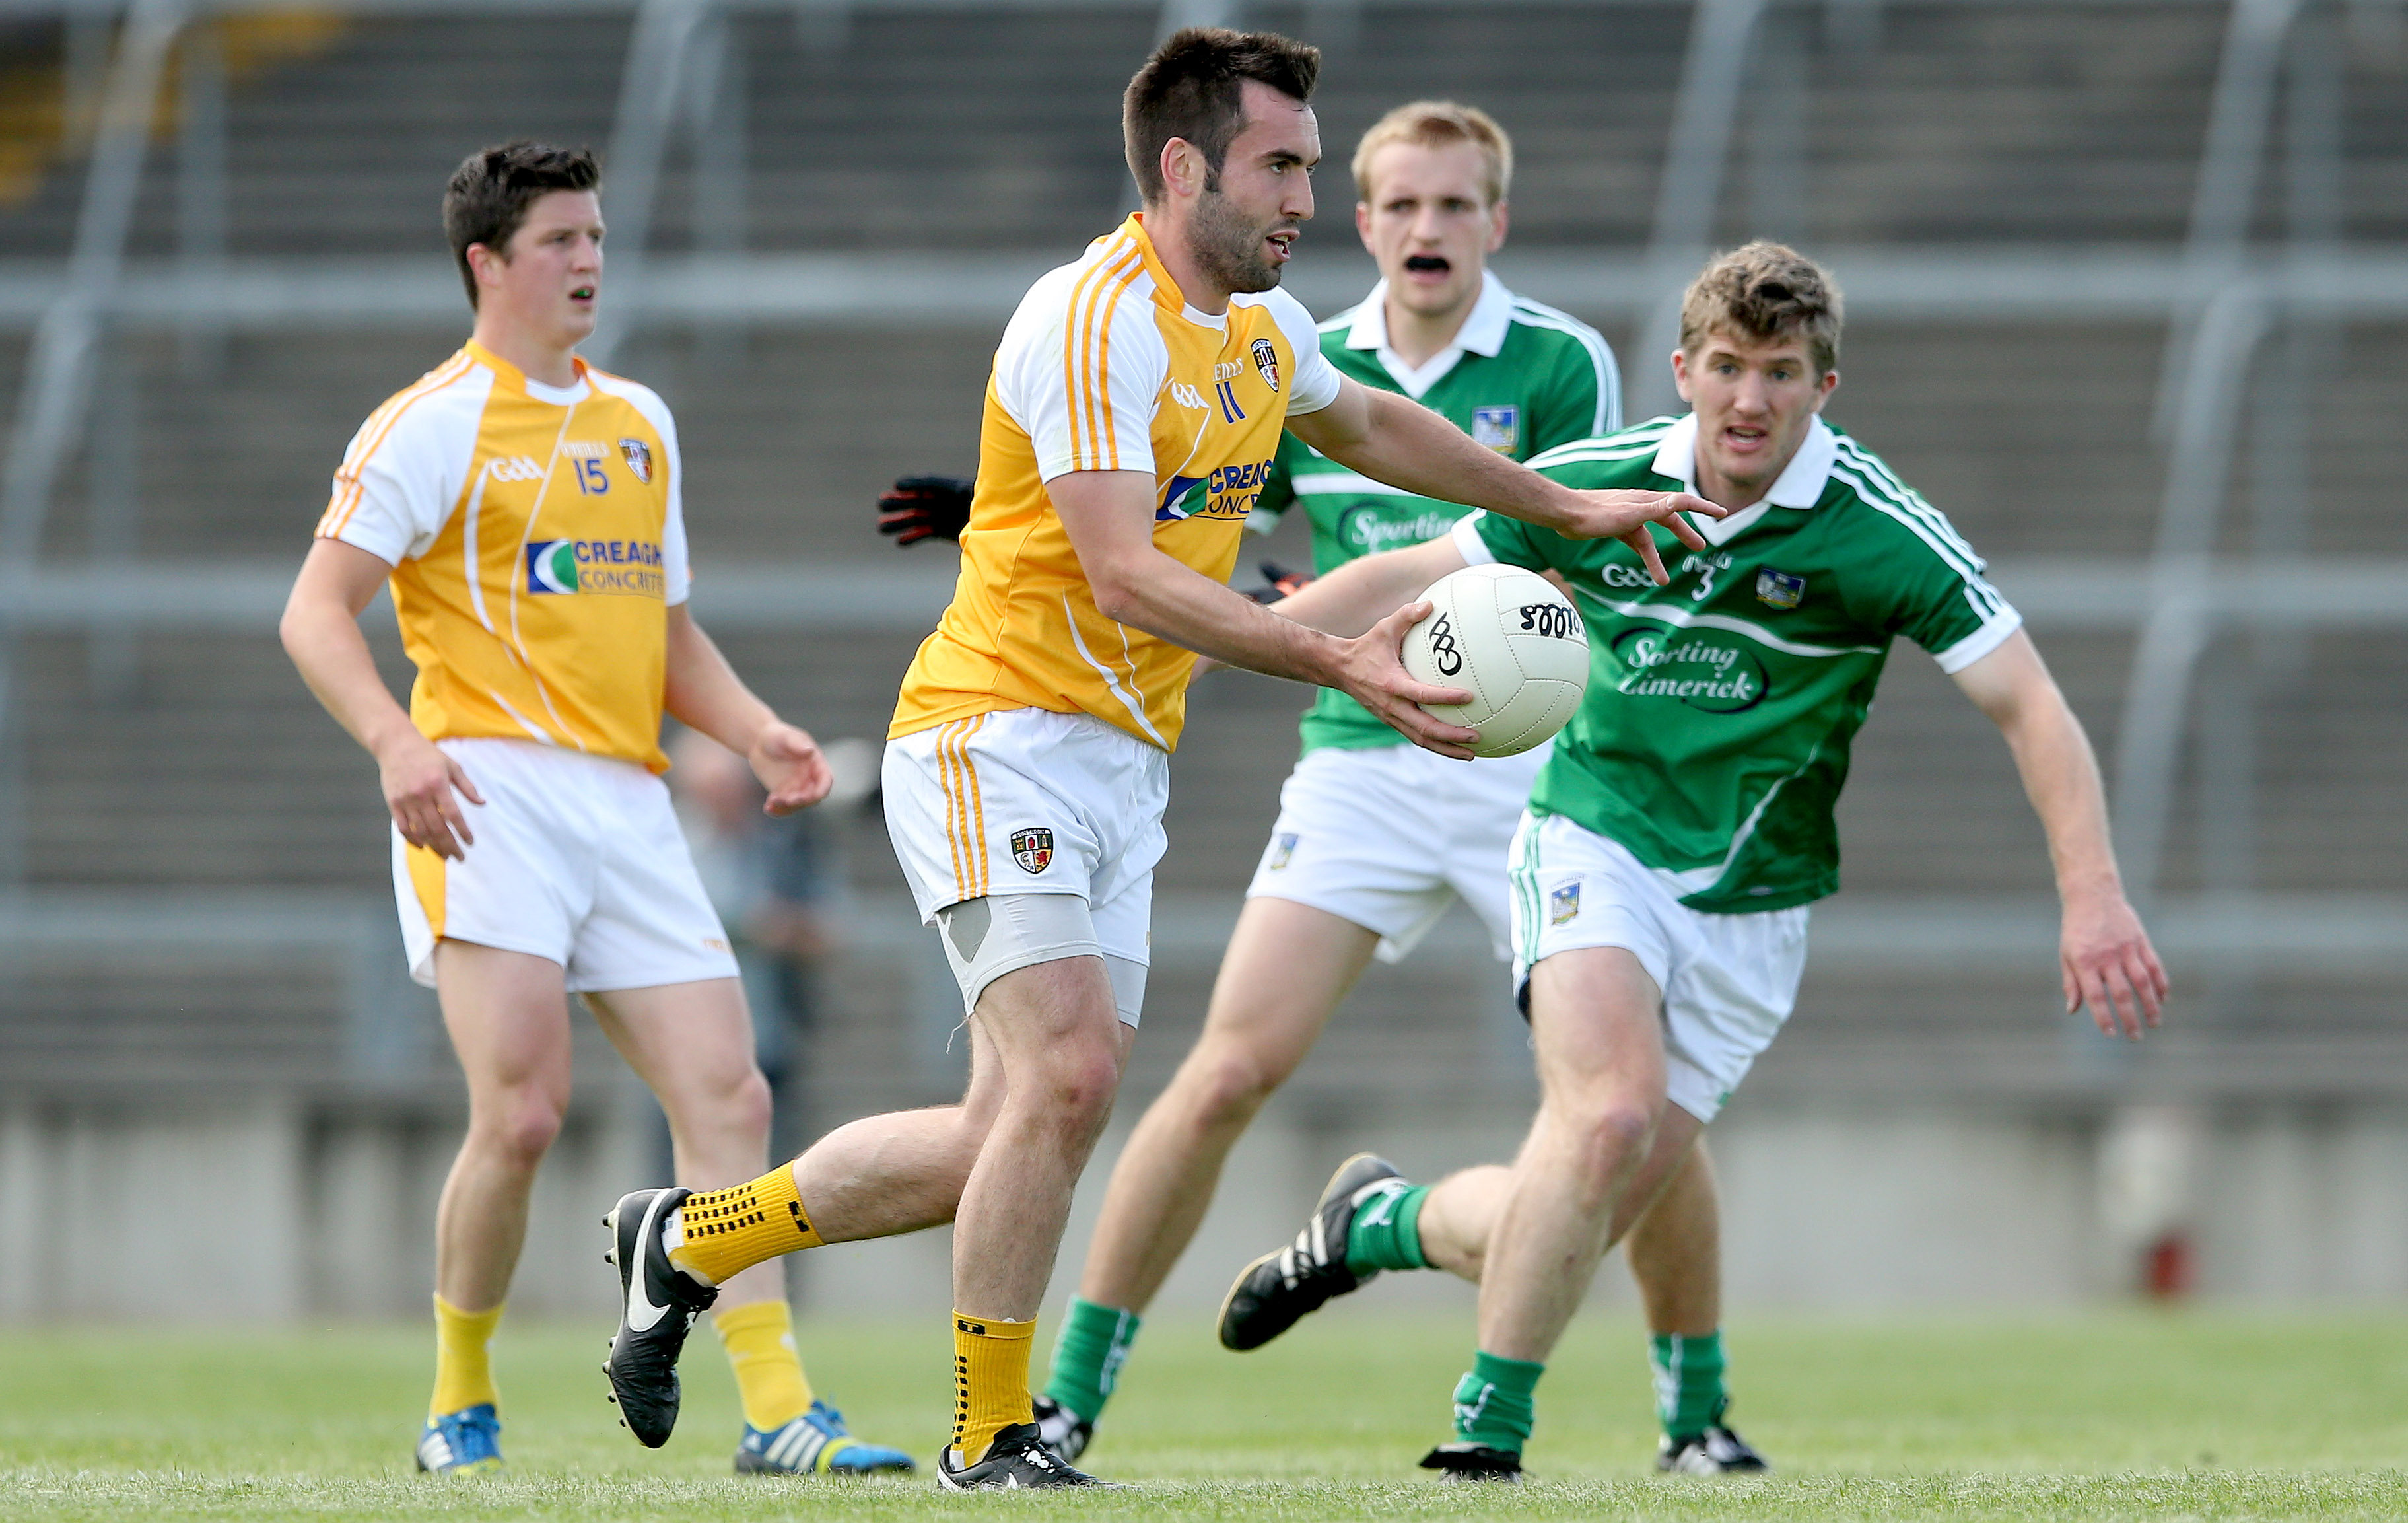 Antrim’s Kevin Niblock gets away from Johnny McCarthy of Limerick during the Qualifier clash in the Gaelic Grounds in 2014. The sides meet again in Corrigan Park on Saturday